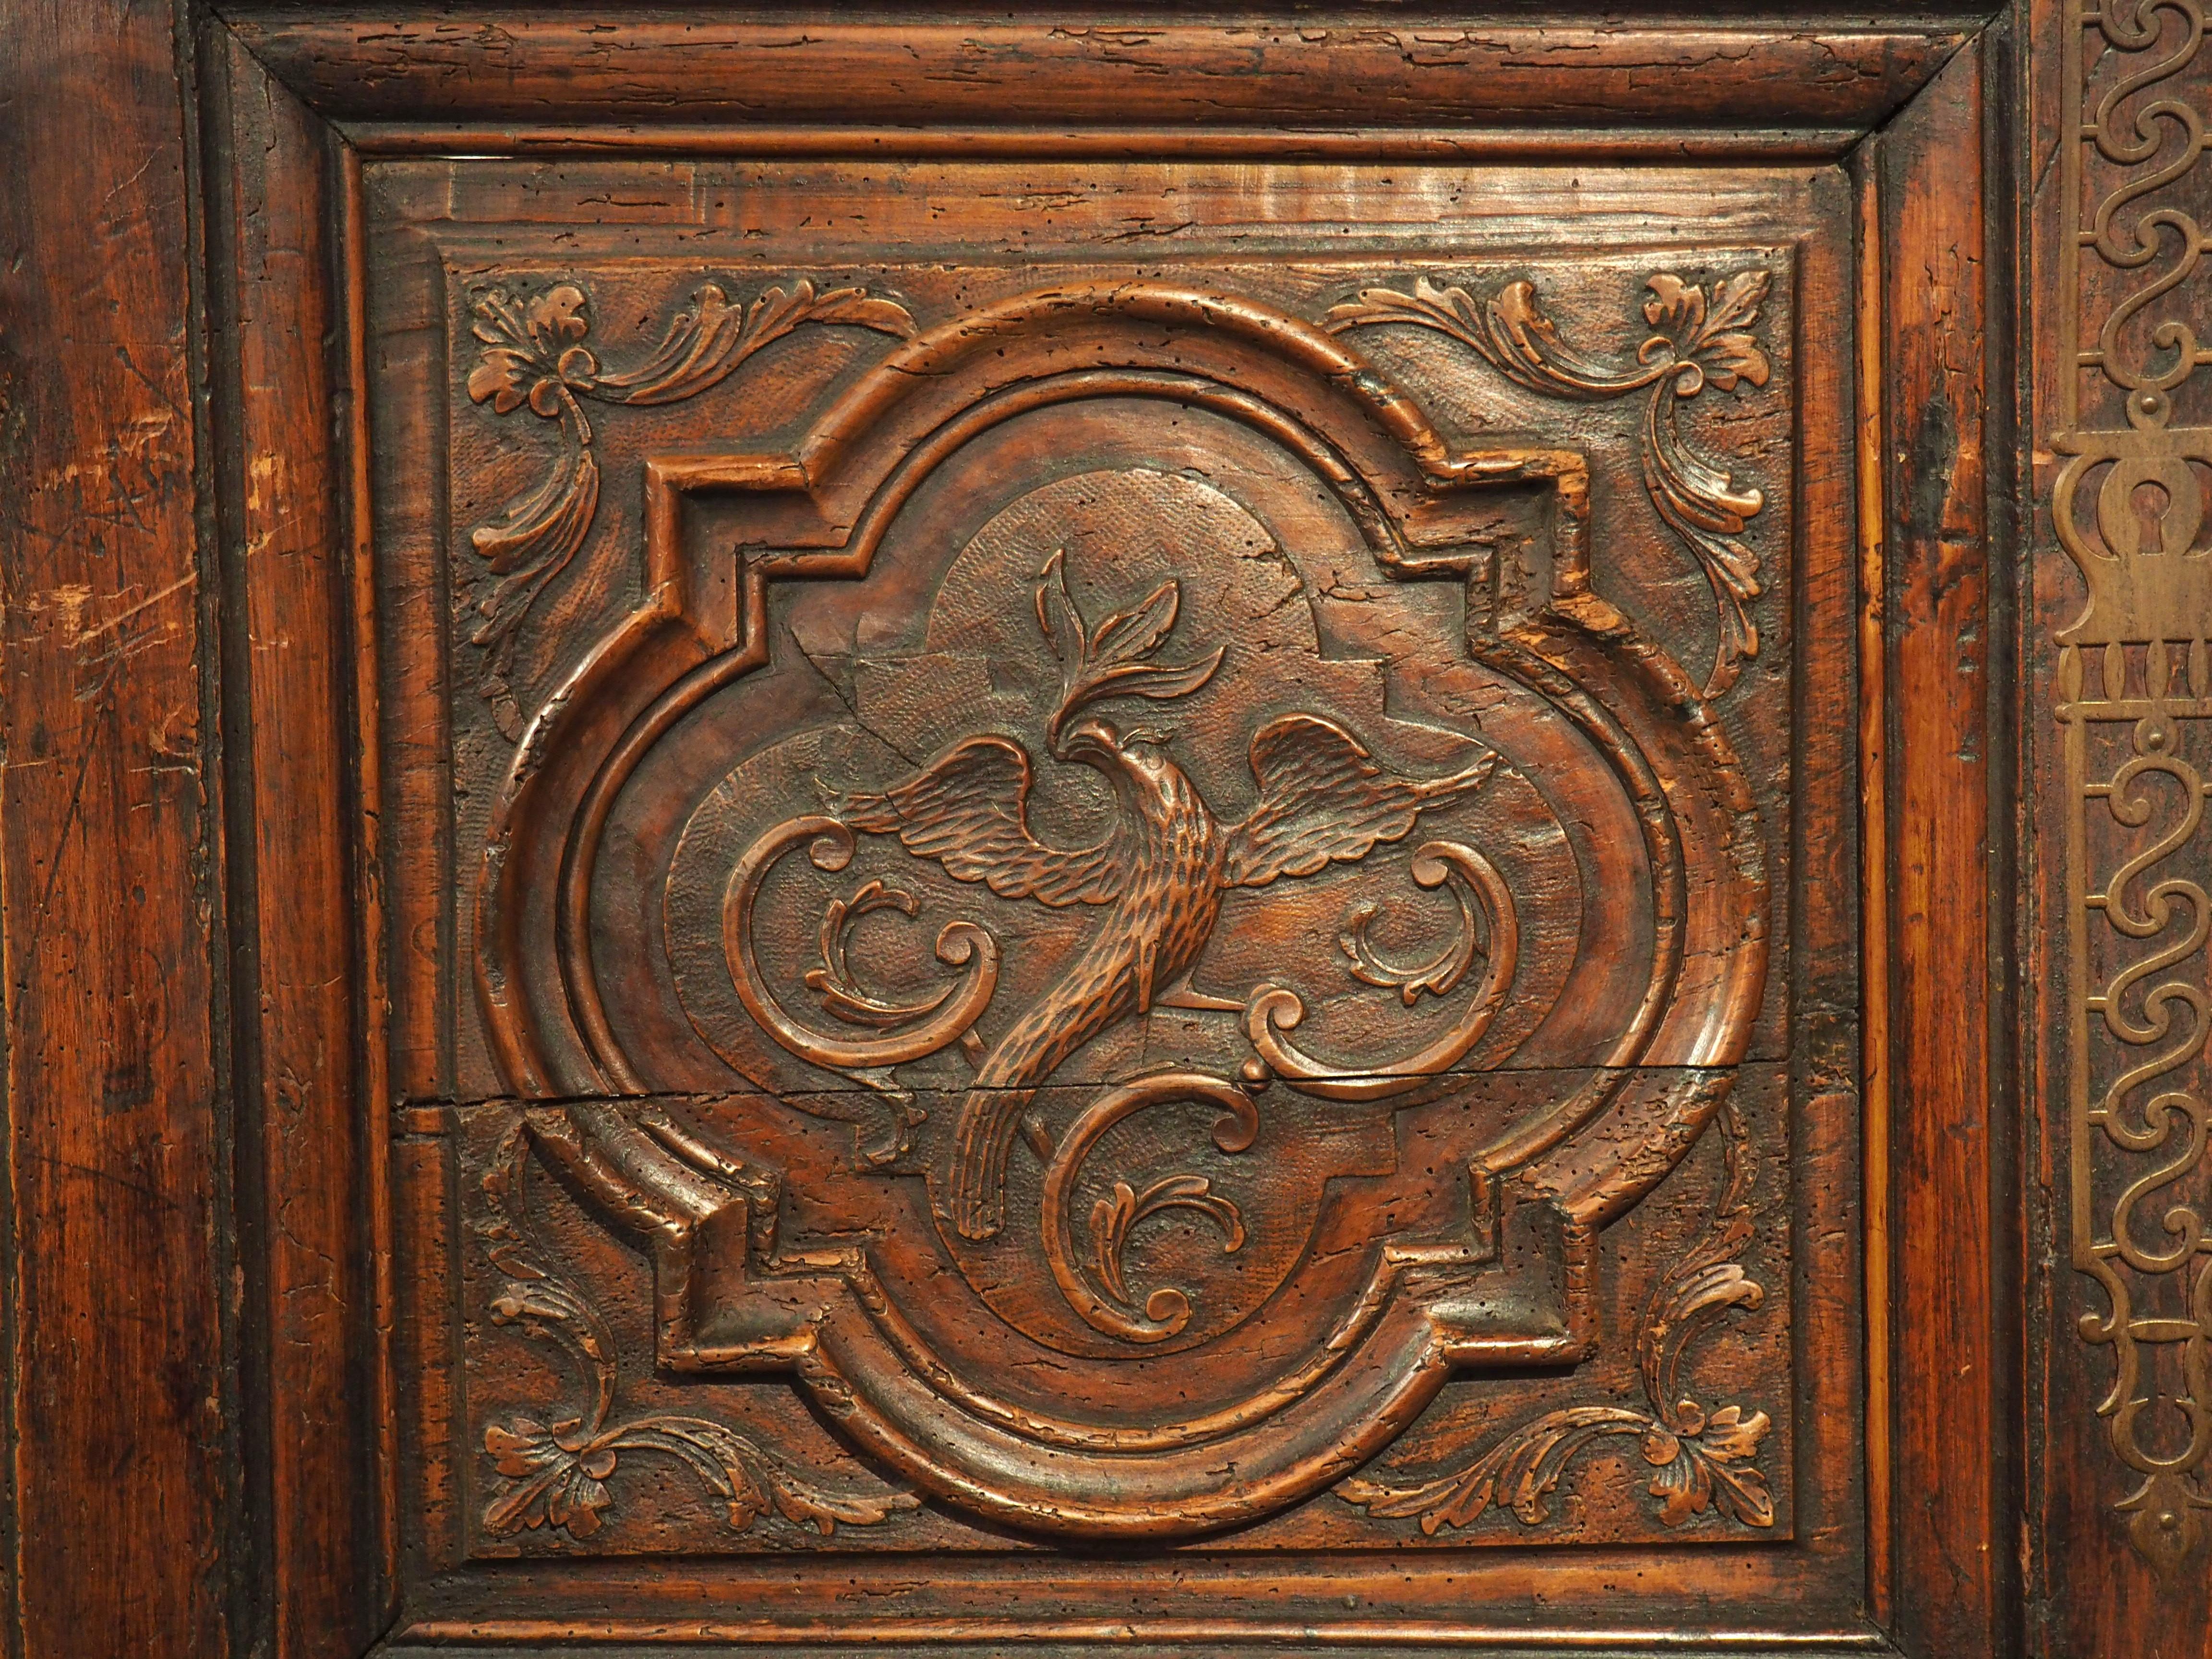 Hand-Carved Pair of Antique Cherry Wood Armoire Doors from Rennes, France, Circa 1720